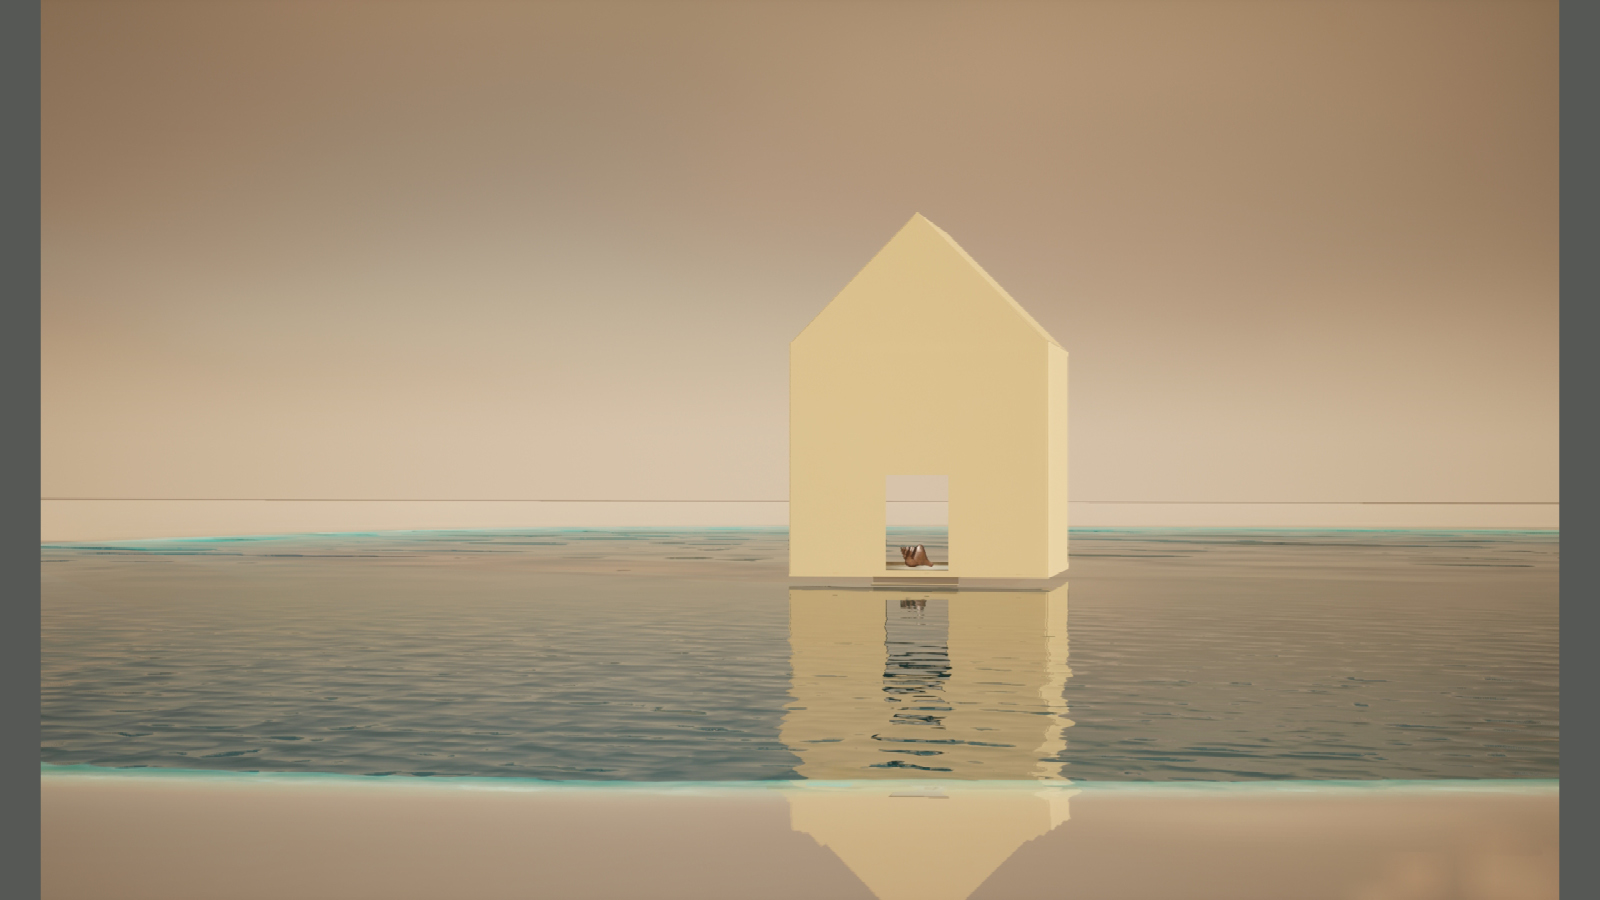 A minimalist scene featuring a small, pale yellow house-like structure situated in the middle of a calm body of water. The water reflects the structure and the soft, pastel sky above. Inside the structure, a seashell is visible through a square opening, adding a subtle element of intrigue to the serene setting. The overall atmosphere is peaceful and contemplative, with gentle colours and clean lines.